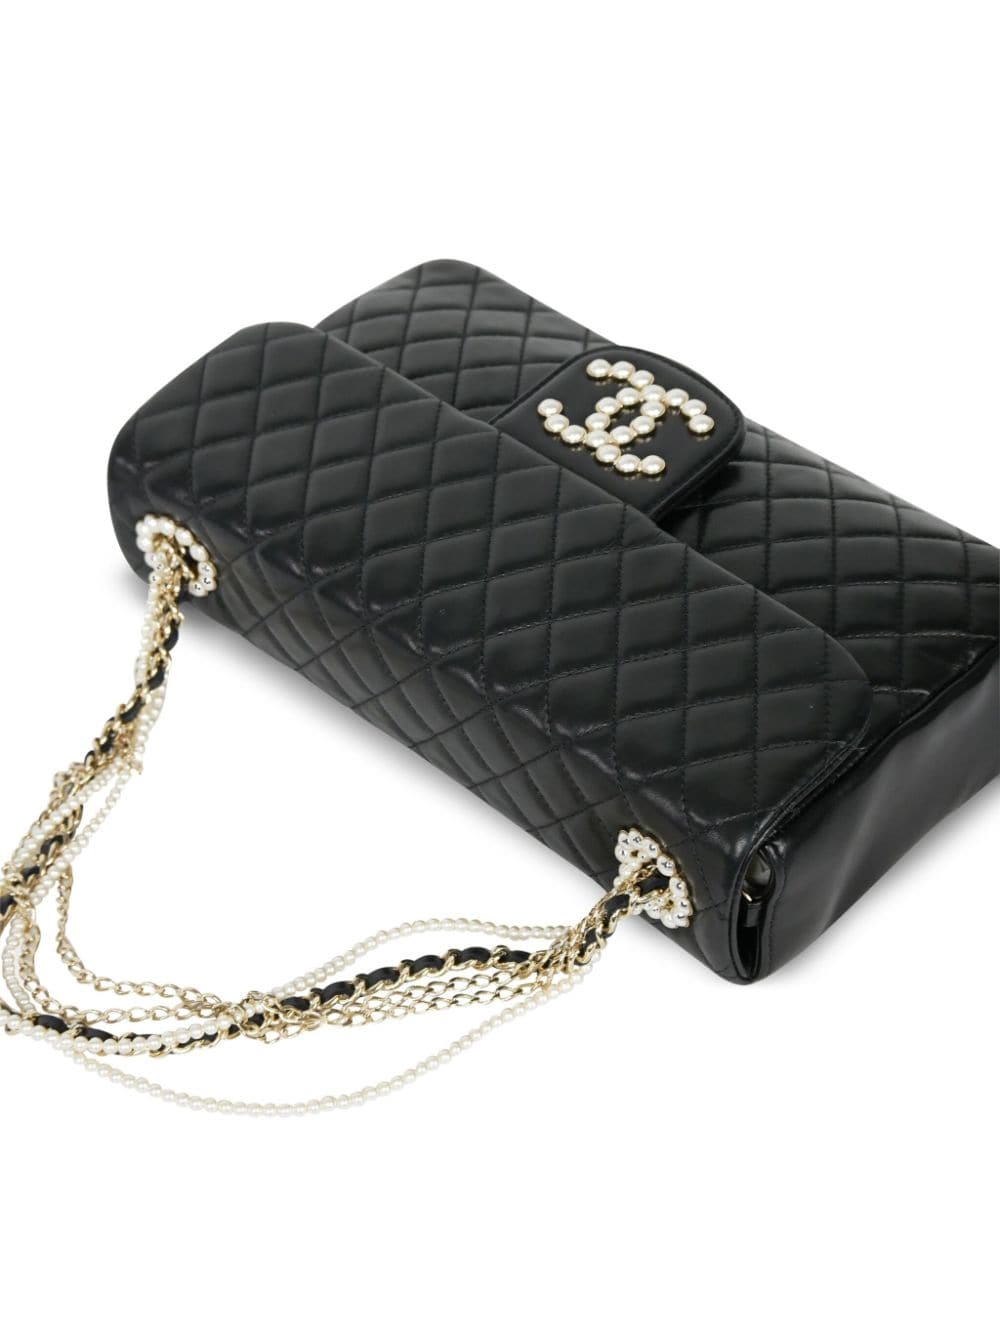 CHANEL Pre-Owned faux-pearl Chains Shoulder Bag - Farfetch